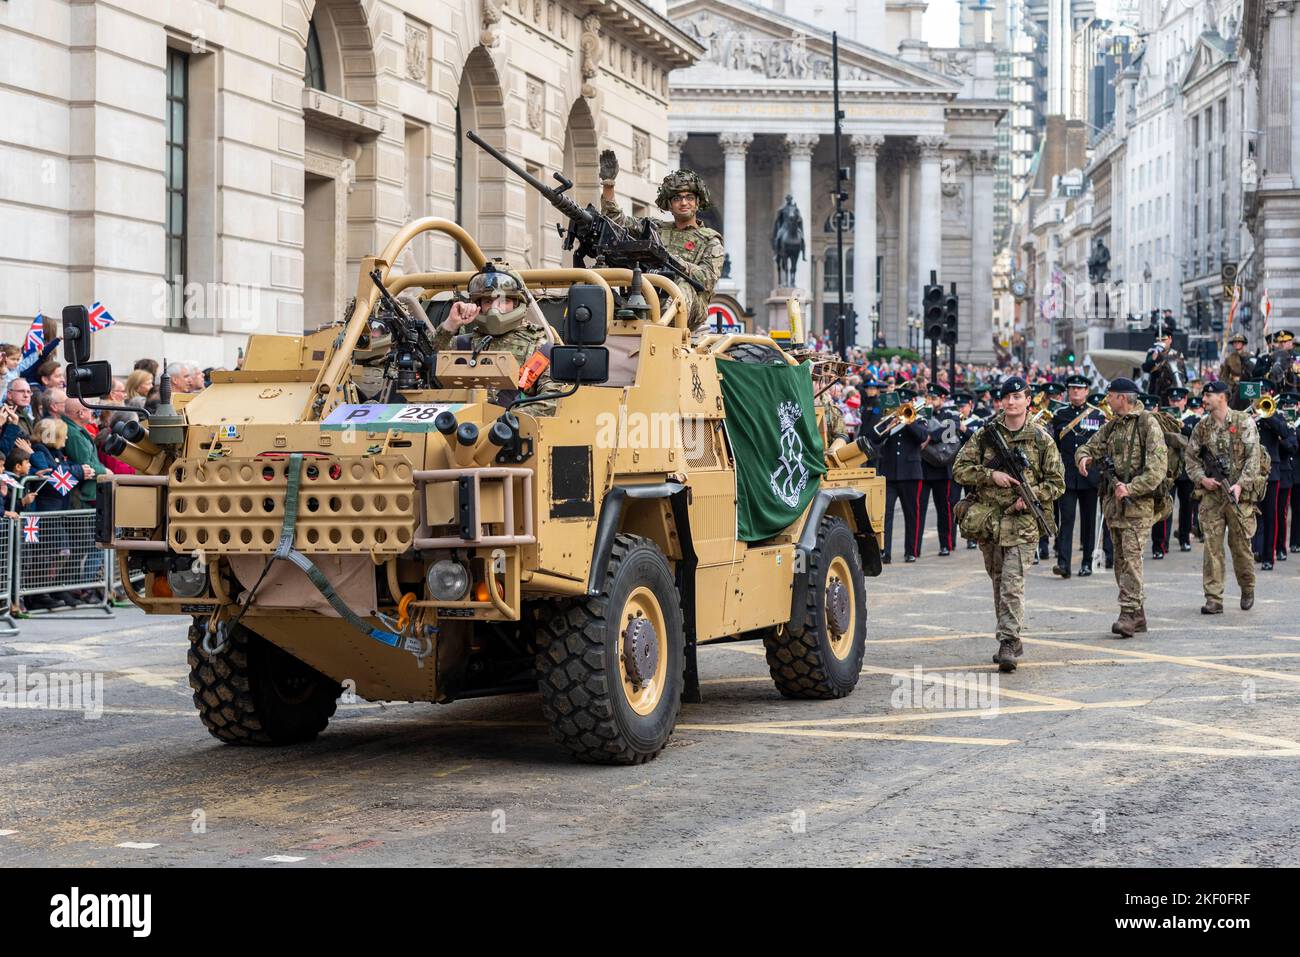 The Royal Yeomanry, Army Reserve Light Cavalry regiment at the Lord Mayor's Show parade in the City of London, UK. Jackal vehicle and soldiers Stock Photo